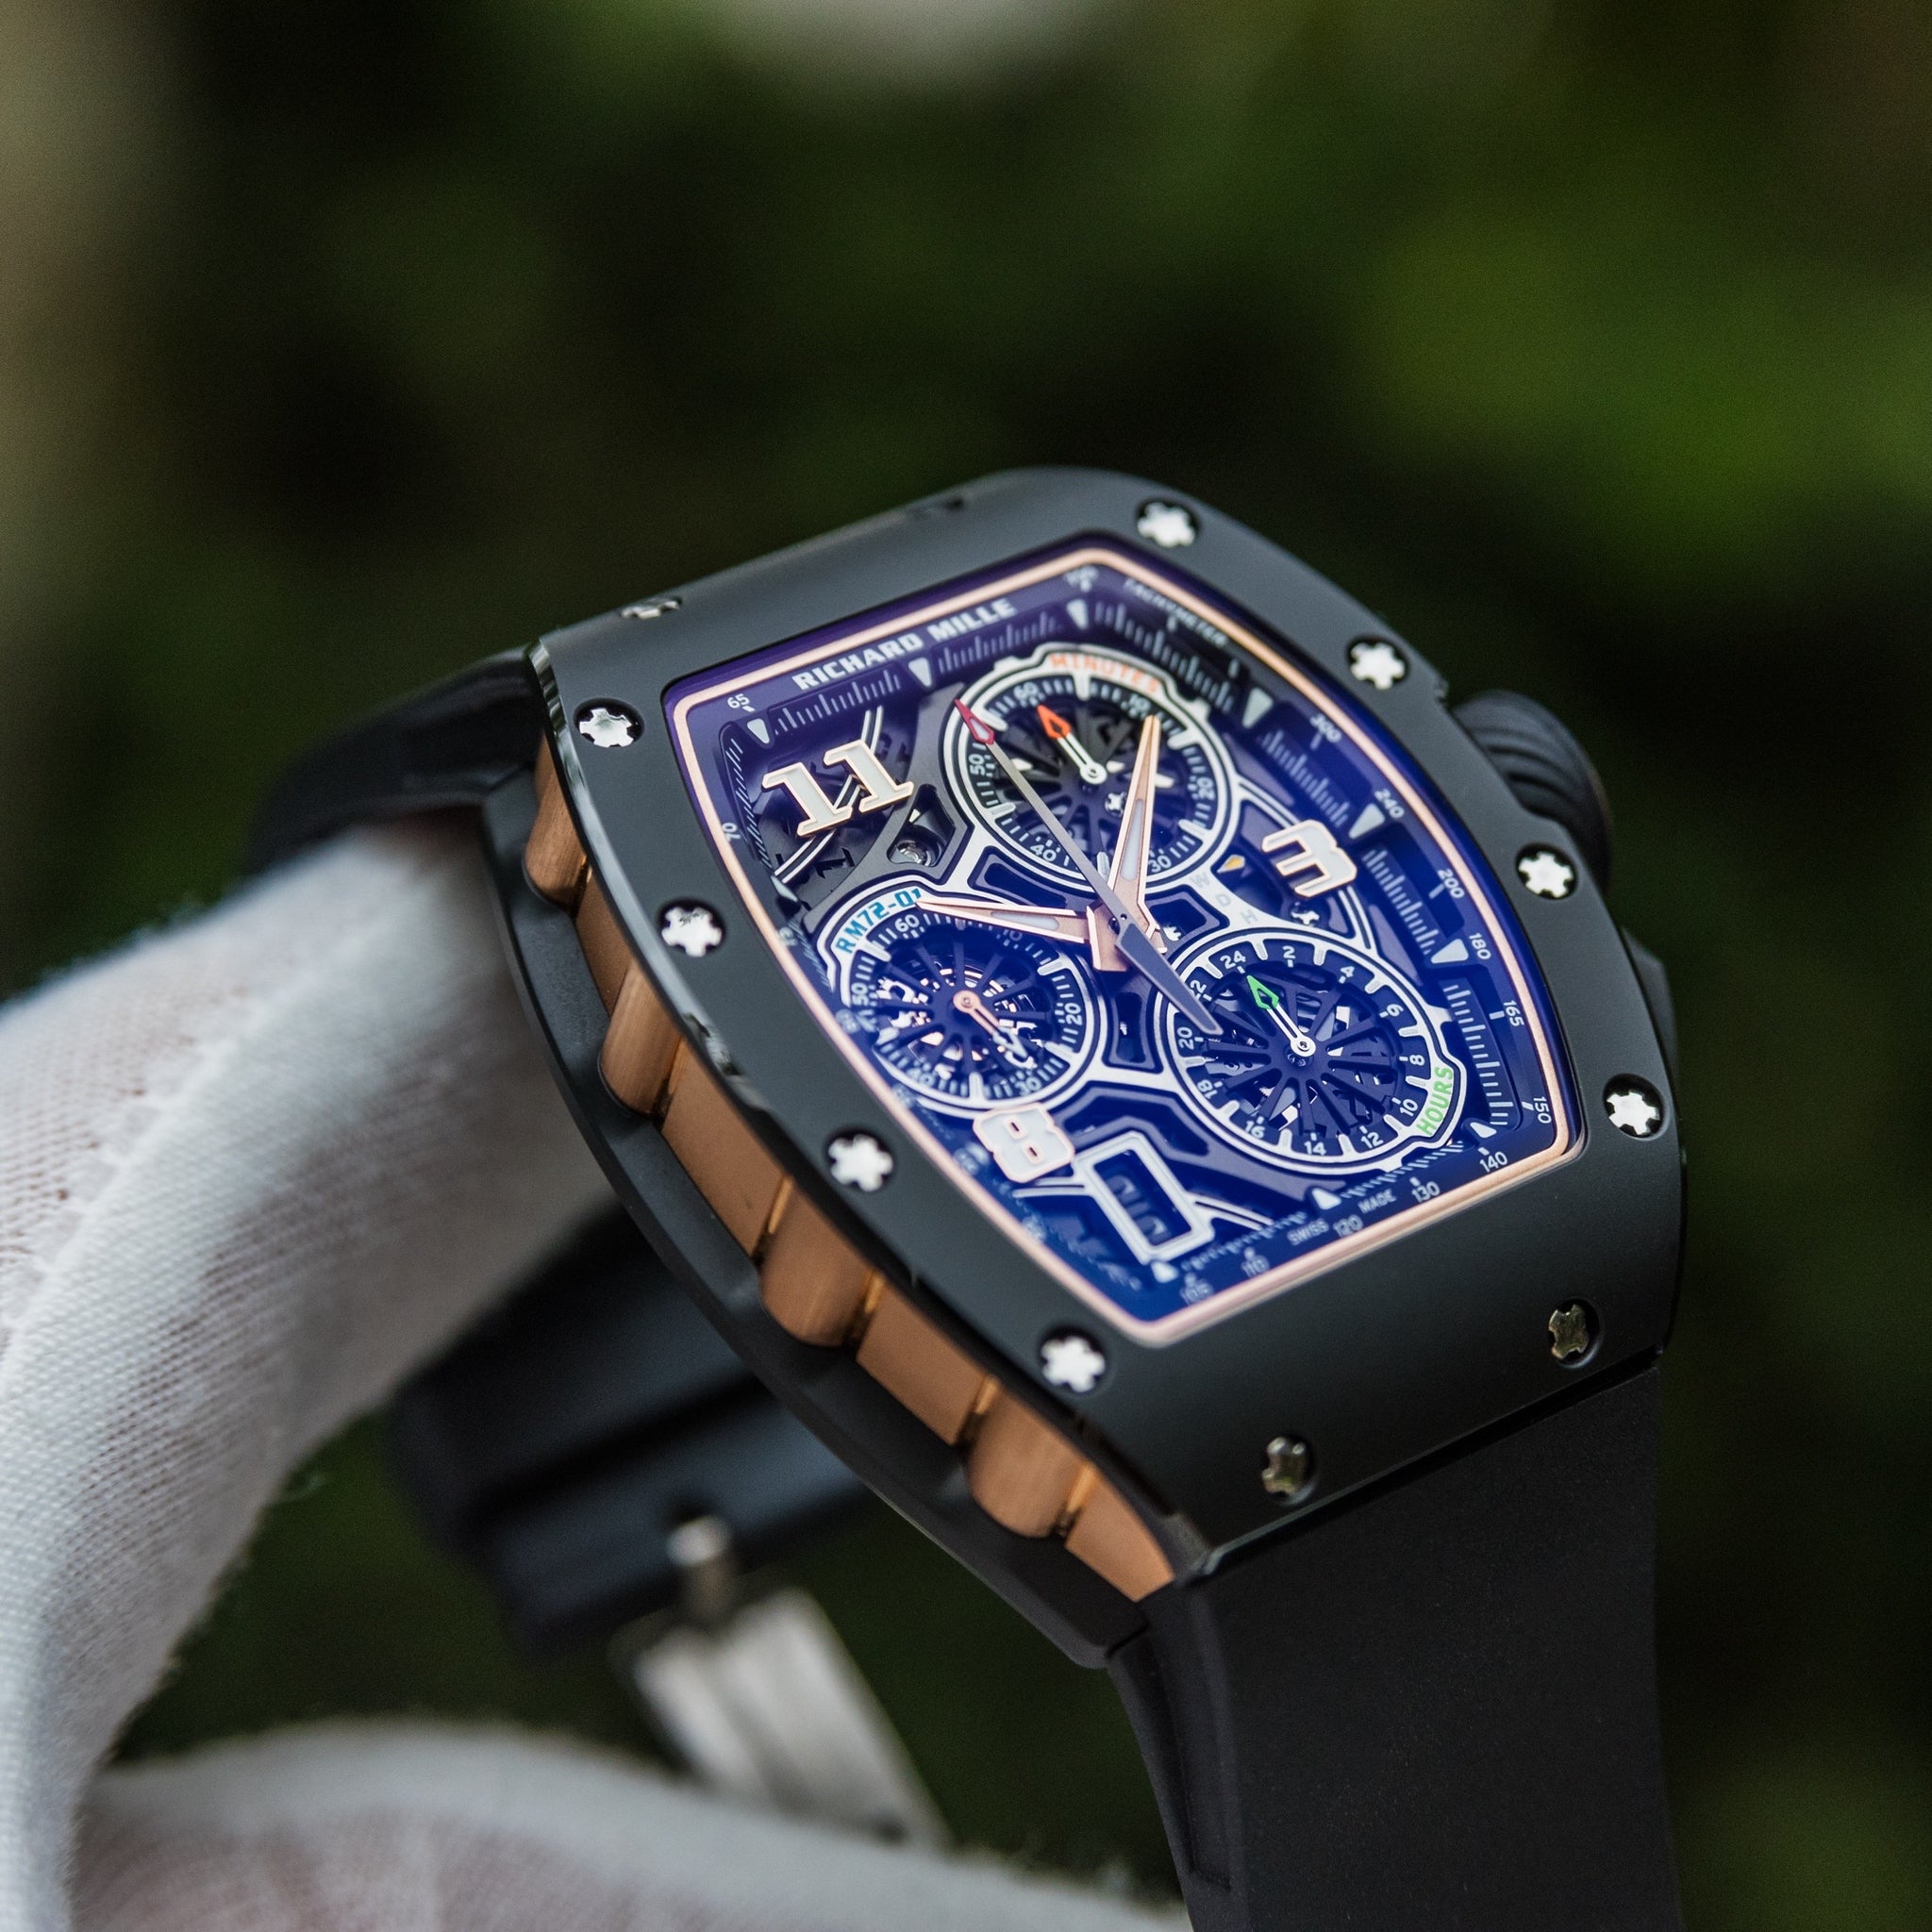 Richard Mille RM 72-01 Automatic Winding Lifestyle Flyback Chronograph Rose Gold / Black Ceramic